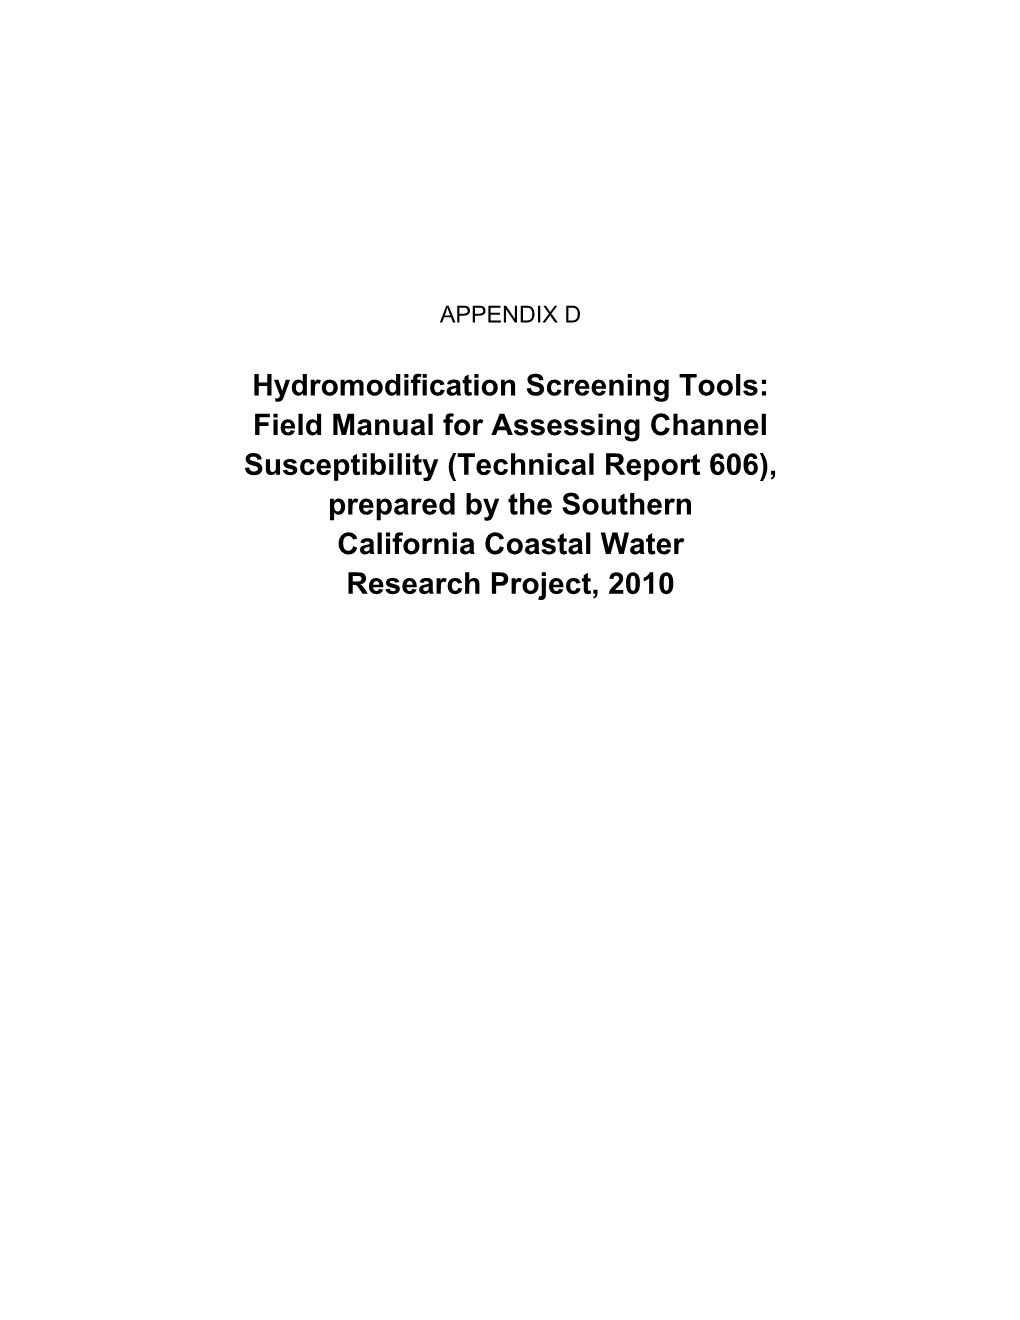 Hydromodification Screening Tools: Field Manual for Assessing